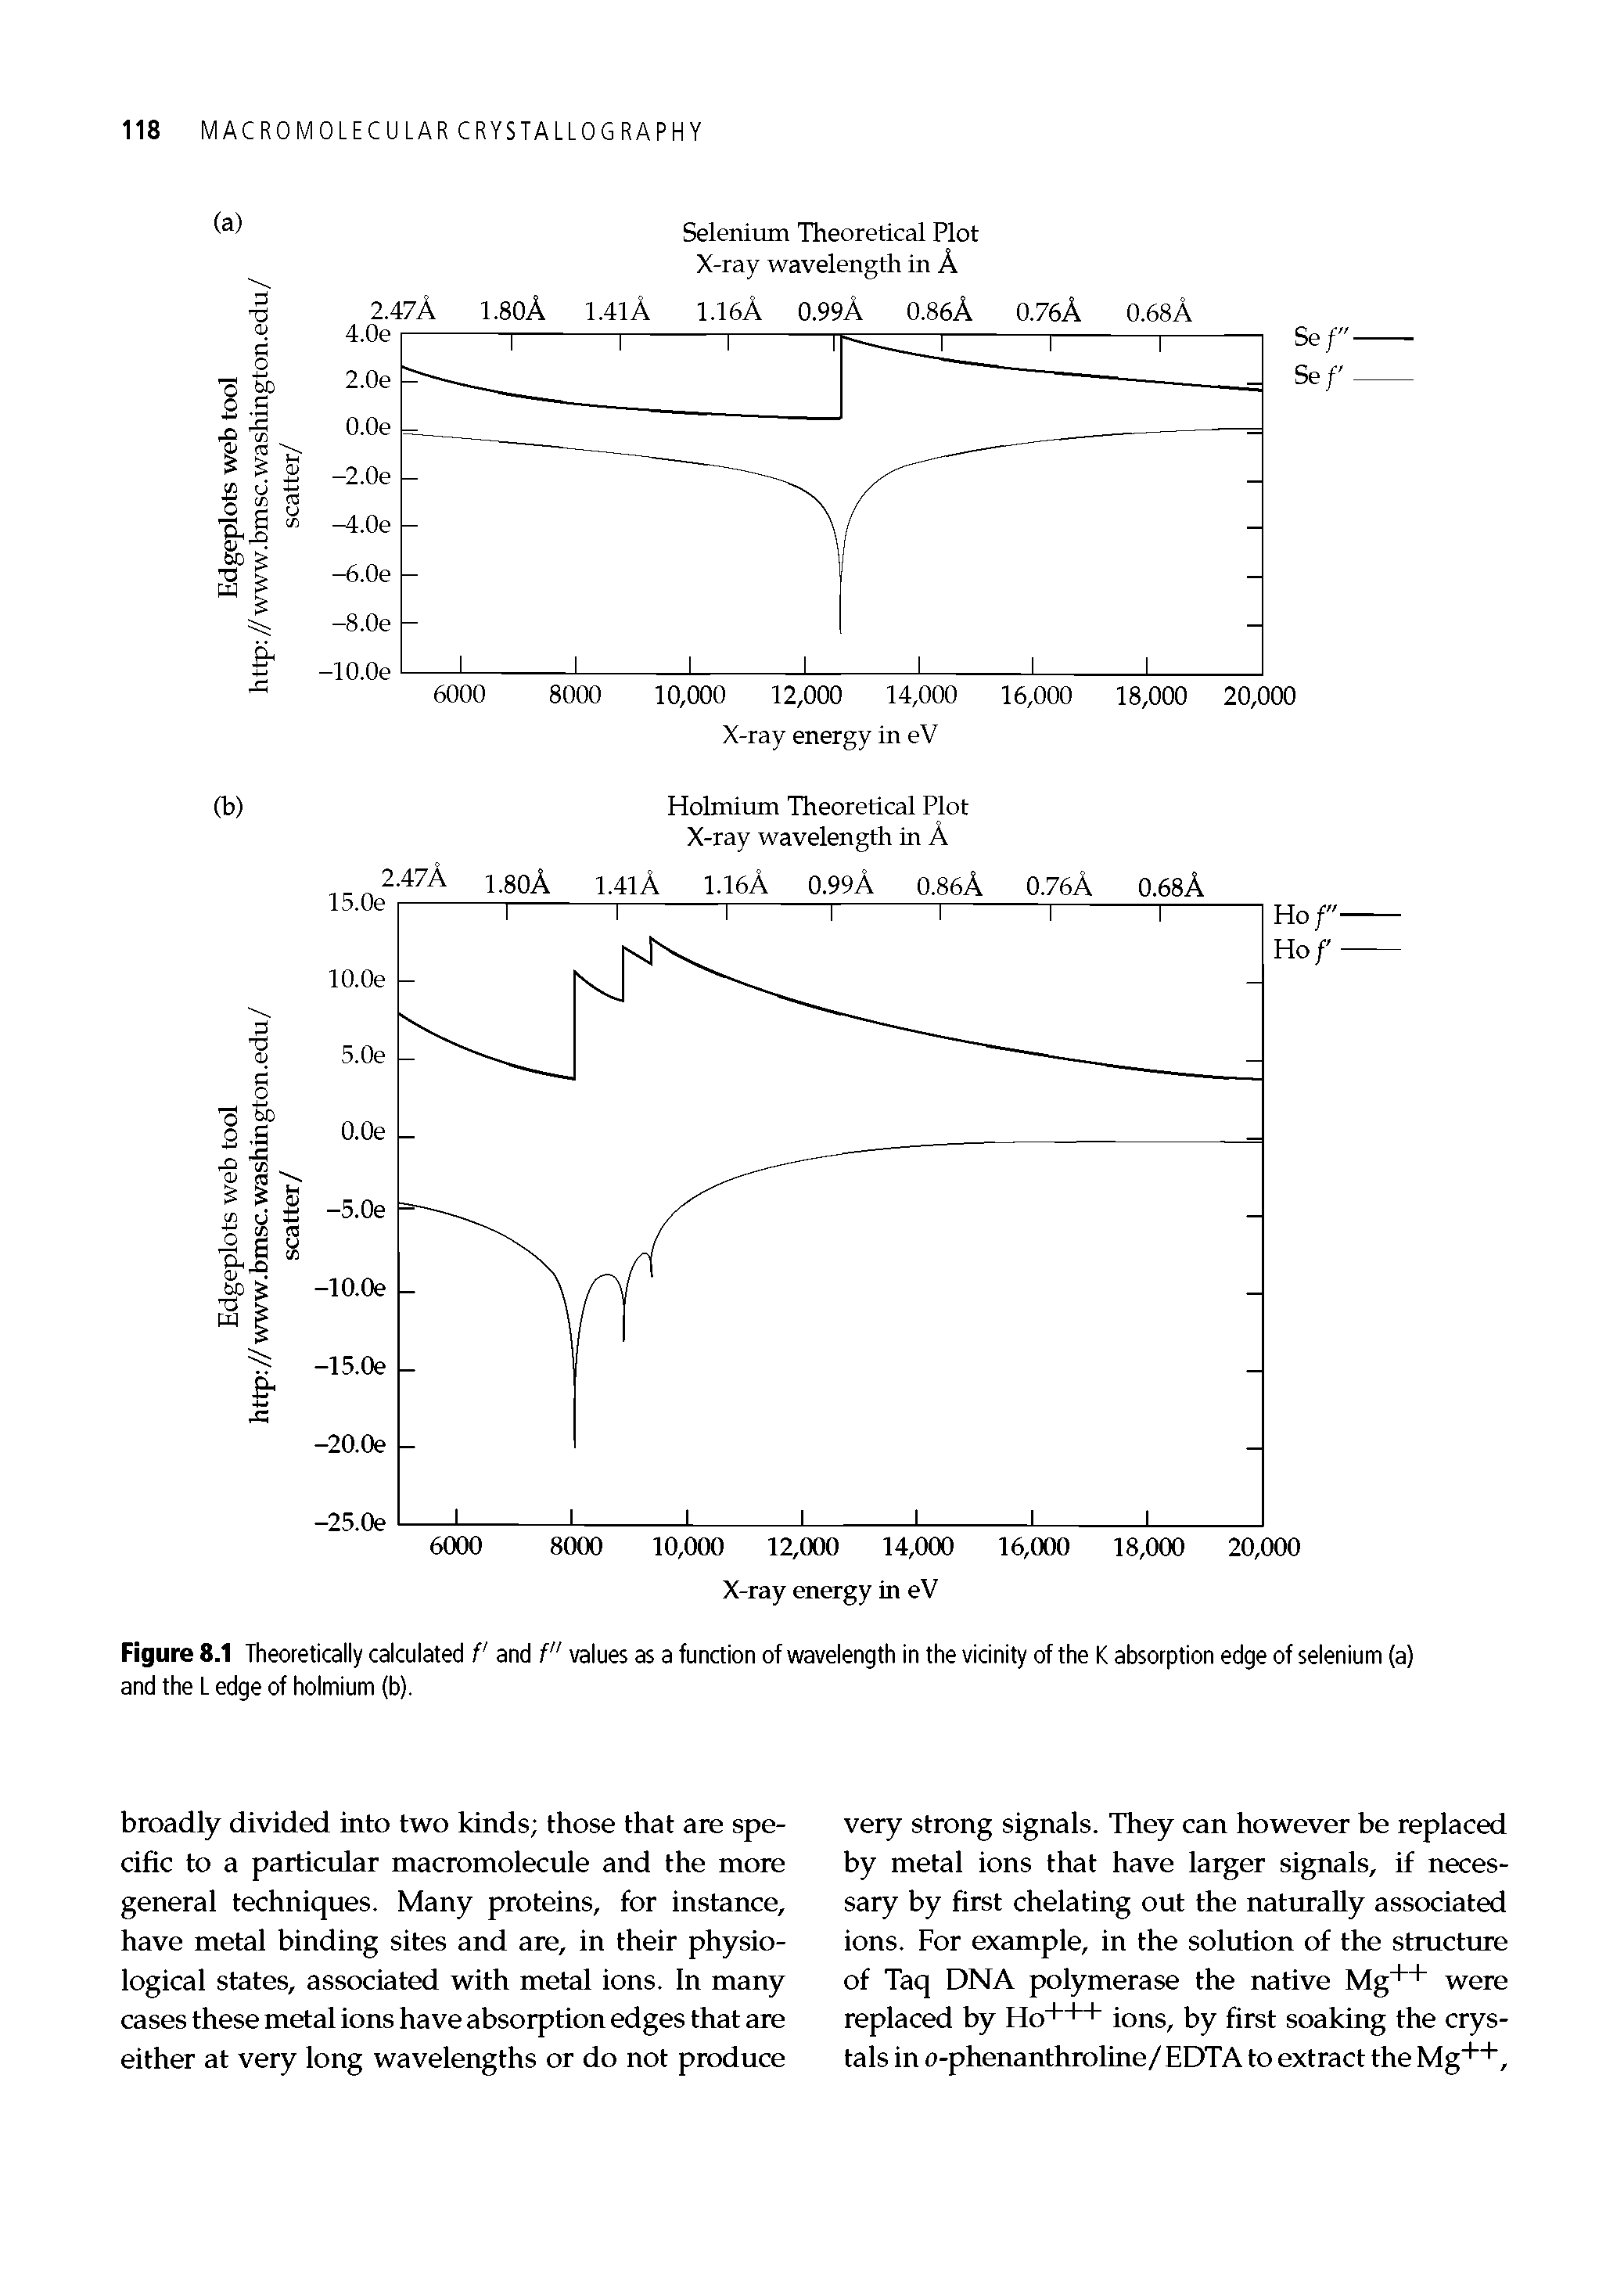 Figure 8.1 Theoretically calculated f and f" values as a function of wavelength in the vicinity of the K absorption edge of selenium (a) and the L edge of holmium (b).